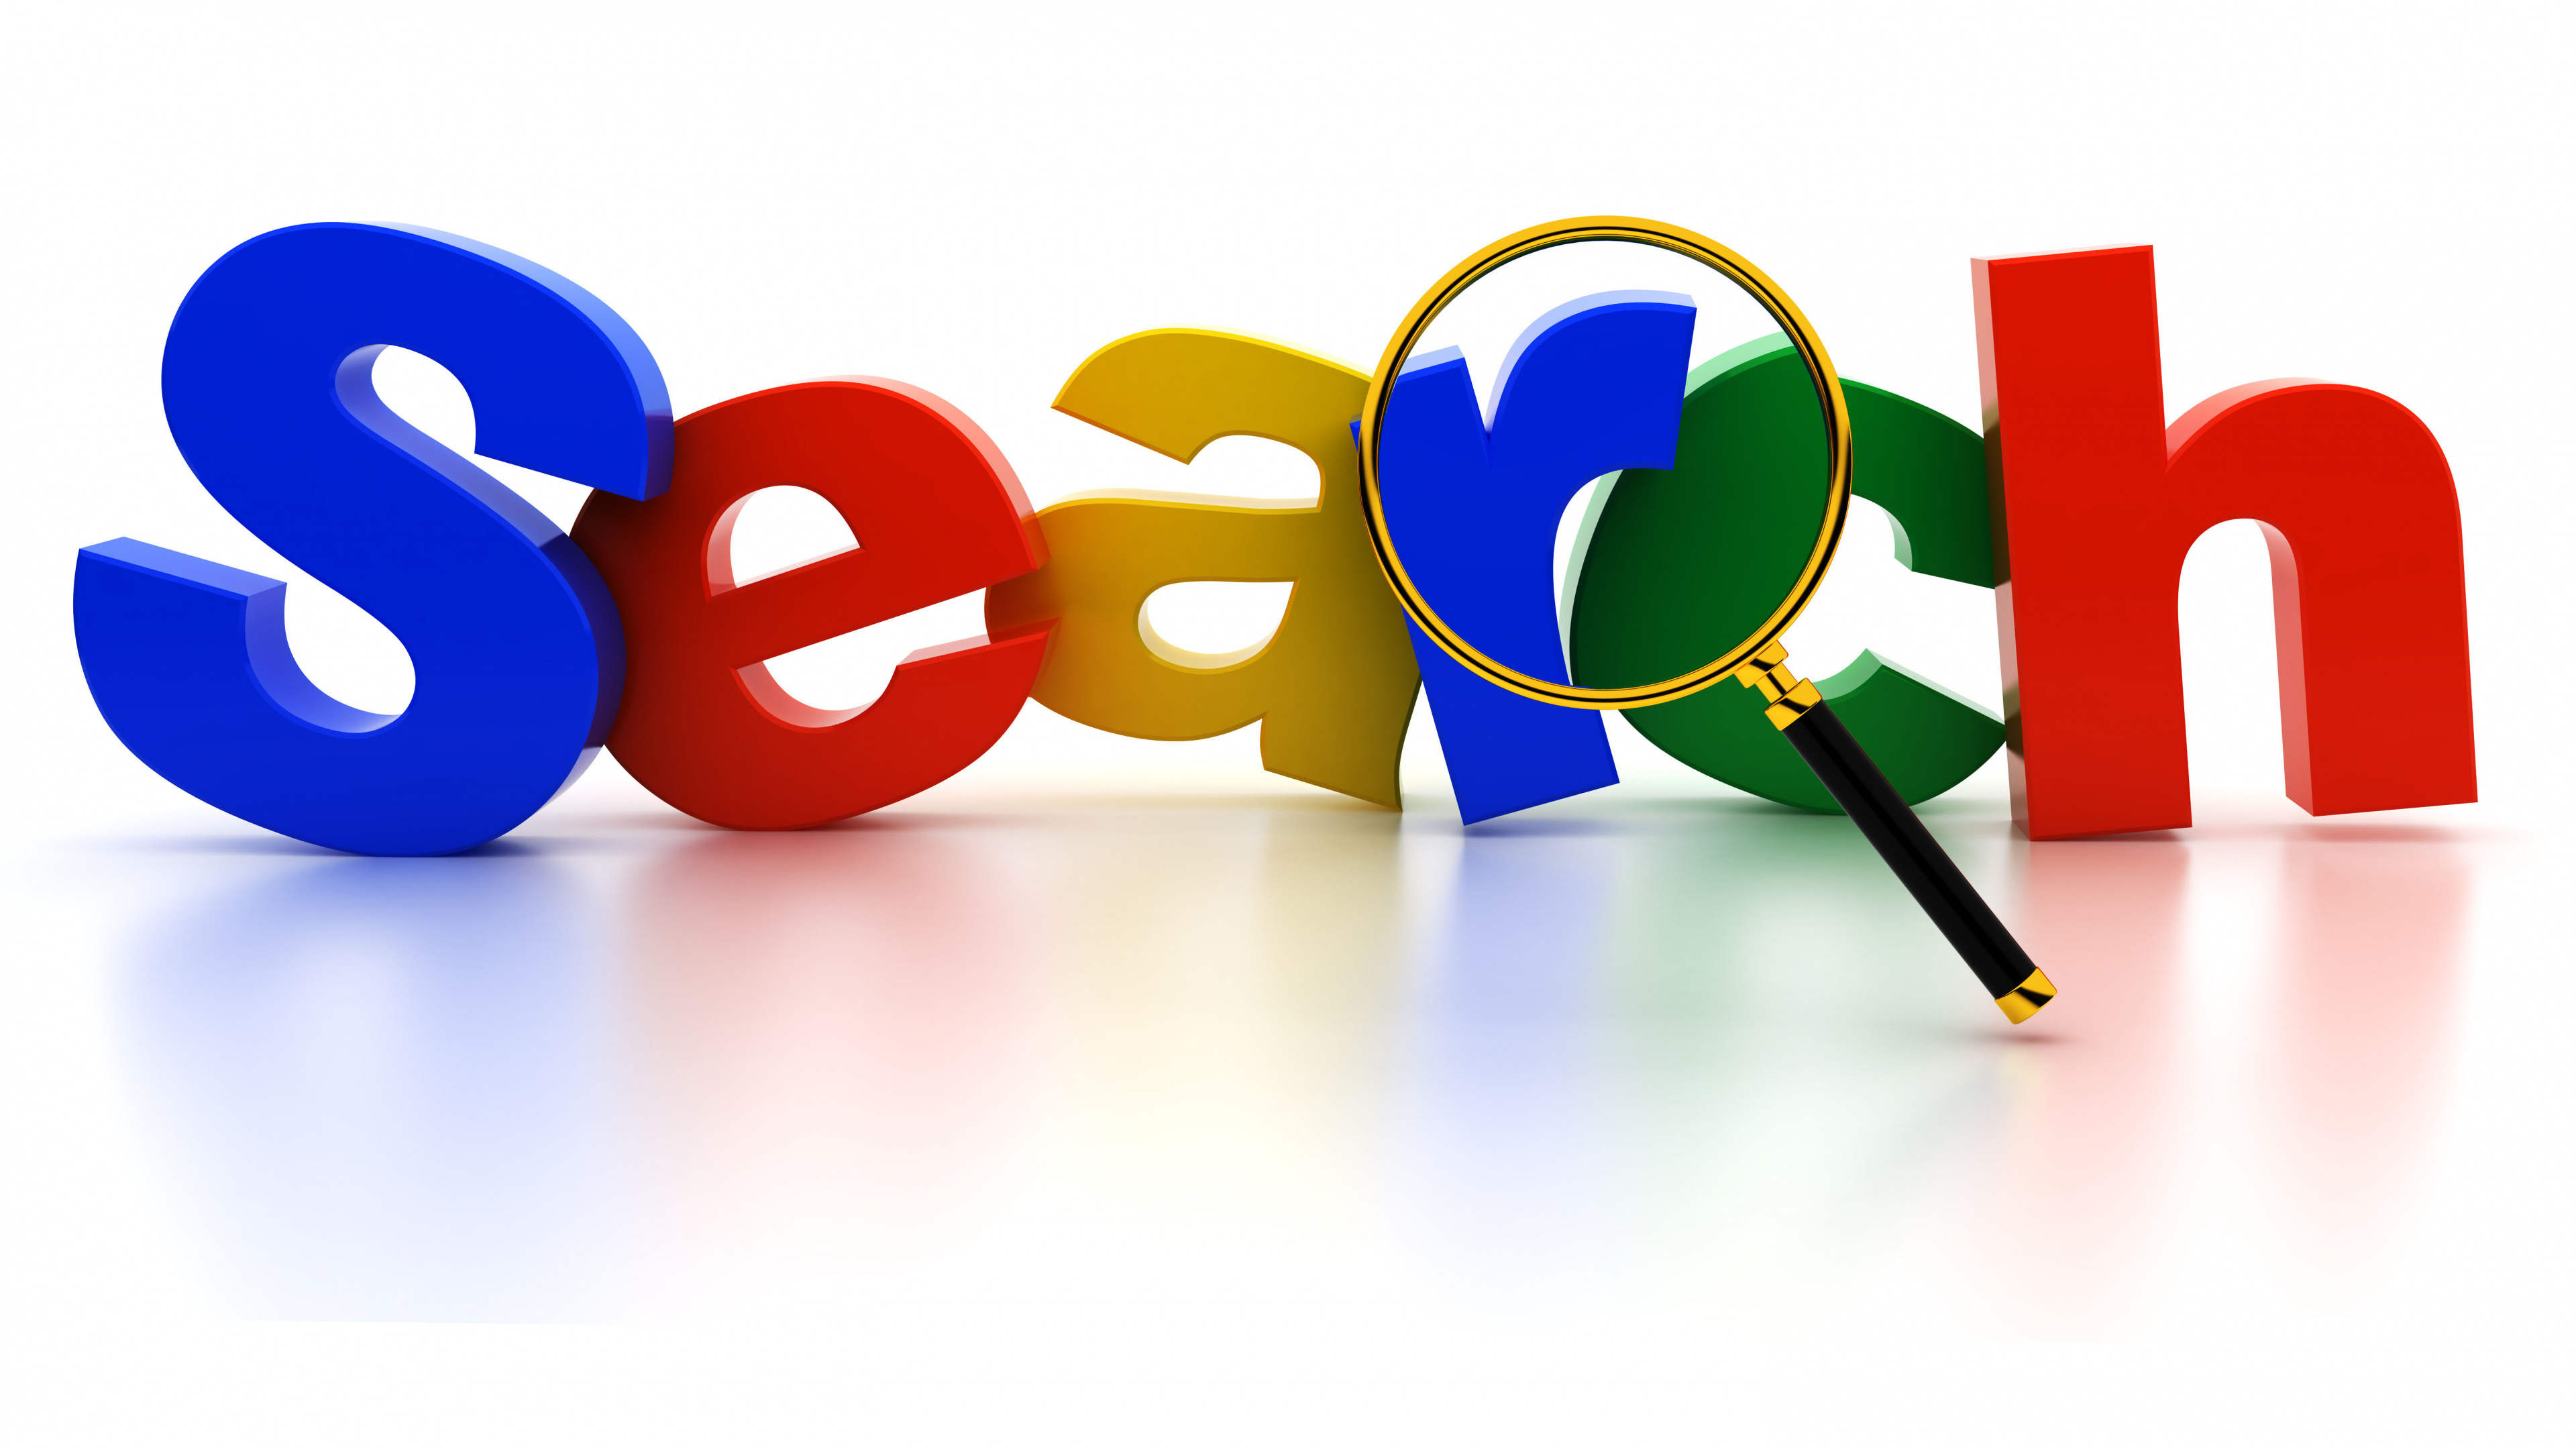 Search Engine Optimization, Web Search Engine, Google Search, Search Engine, Text. Wallpaper in 3840x2160 Resolution